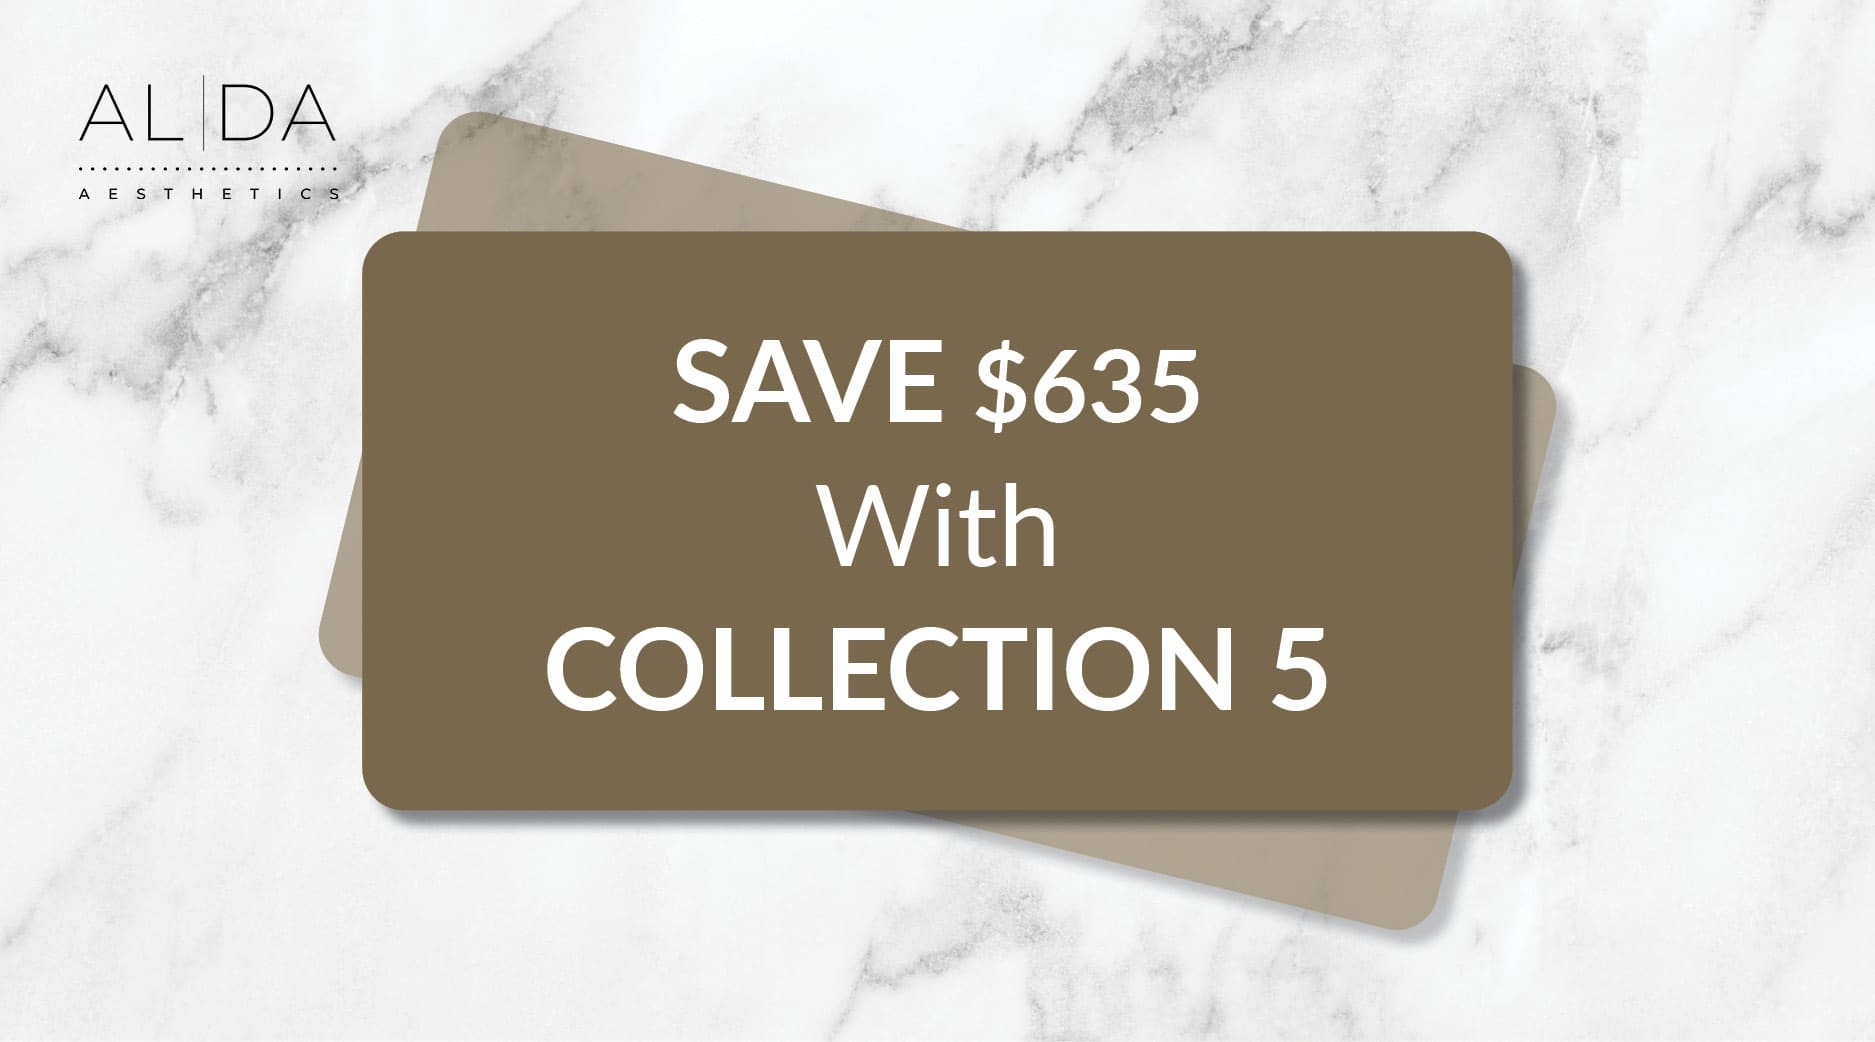 Save $635 With Our VIP Collection 5 Program